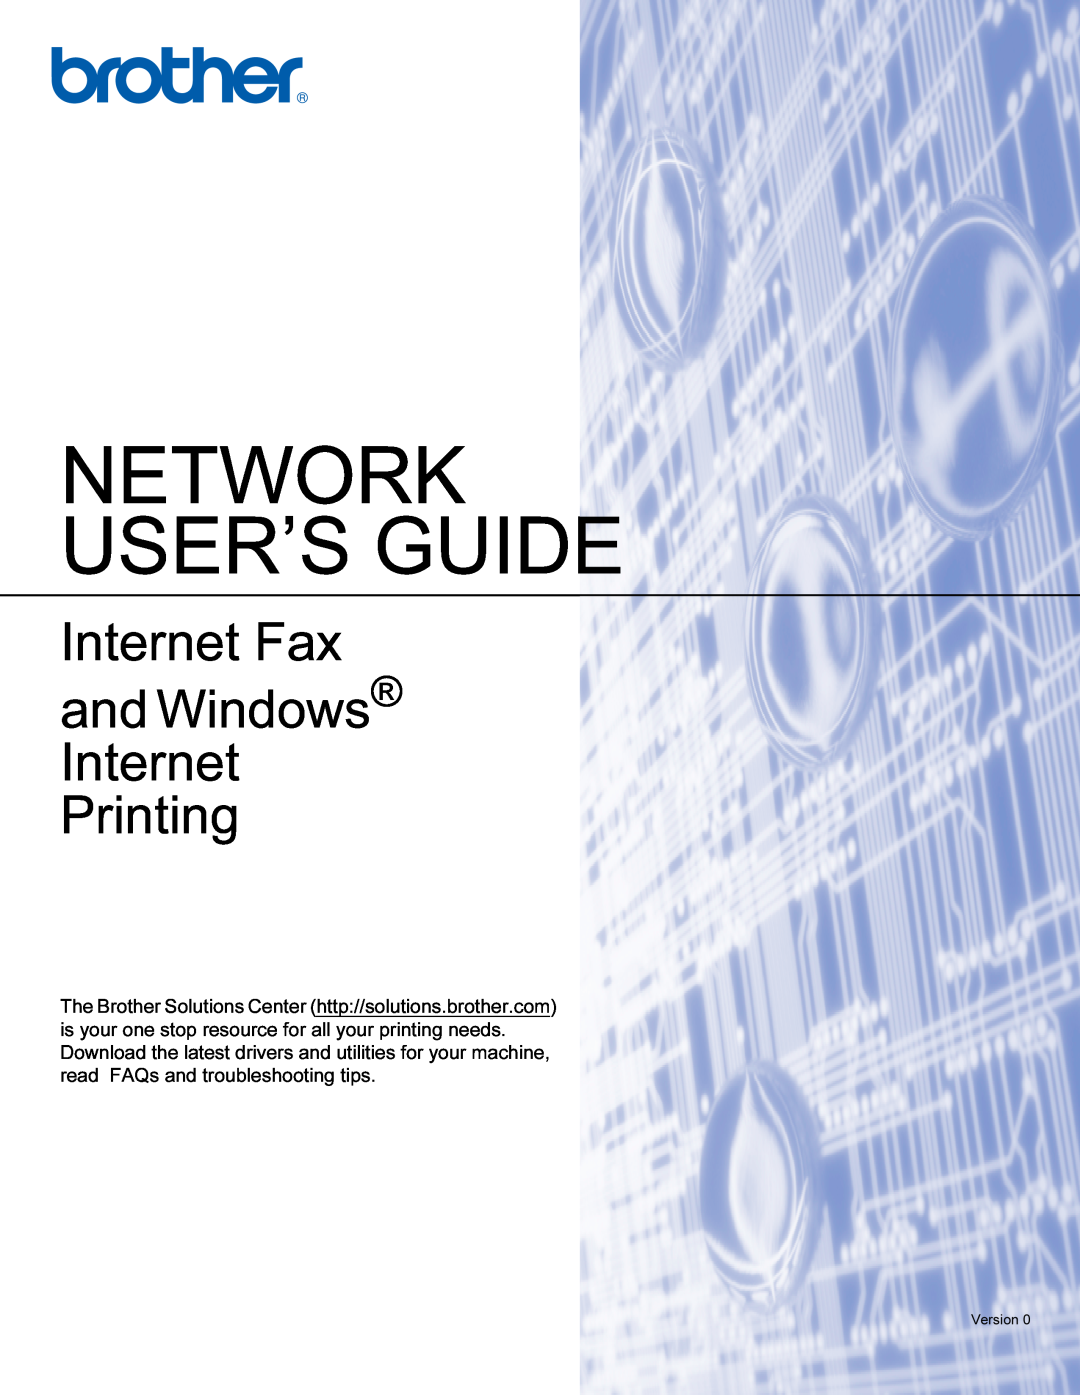 Brother SHB6102 manual Network User’S Guide, Internet Fax and Windows Internet Printing, Version 